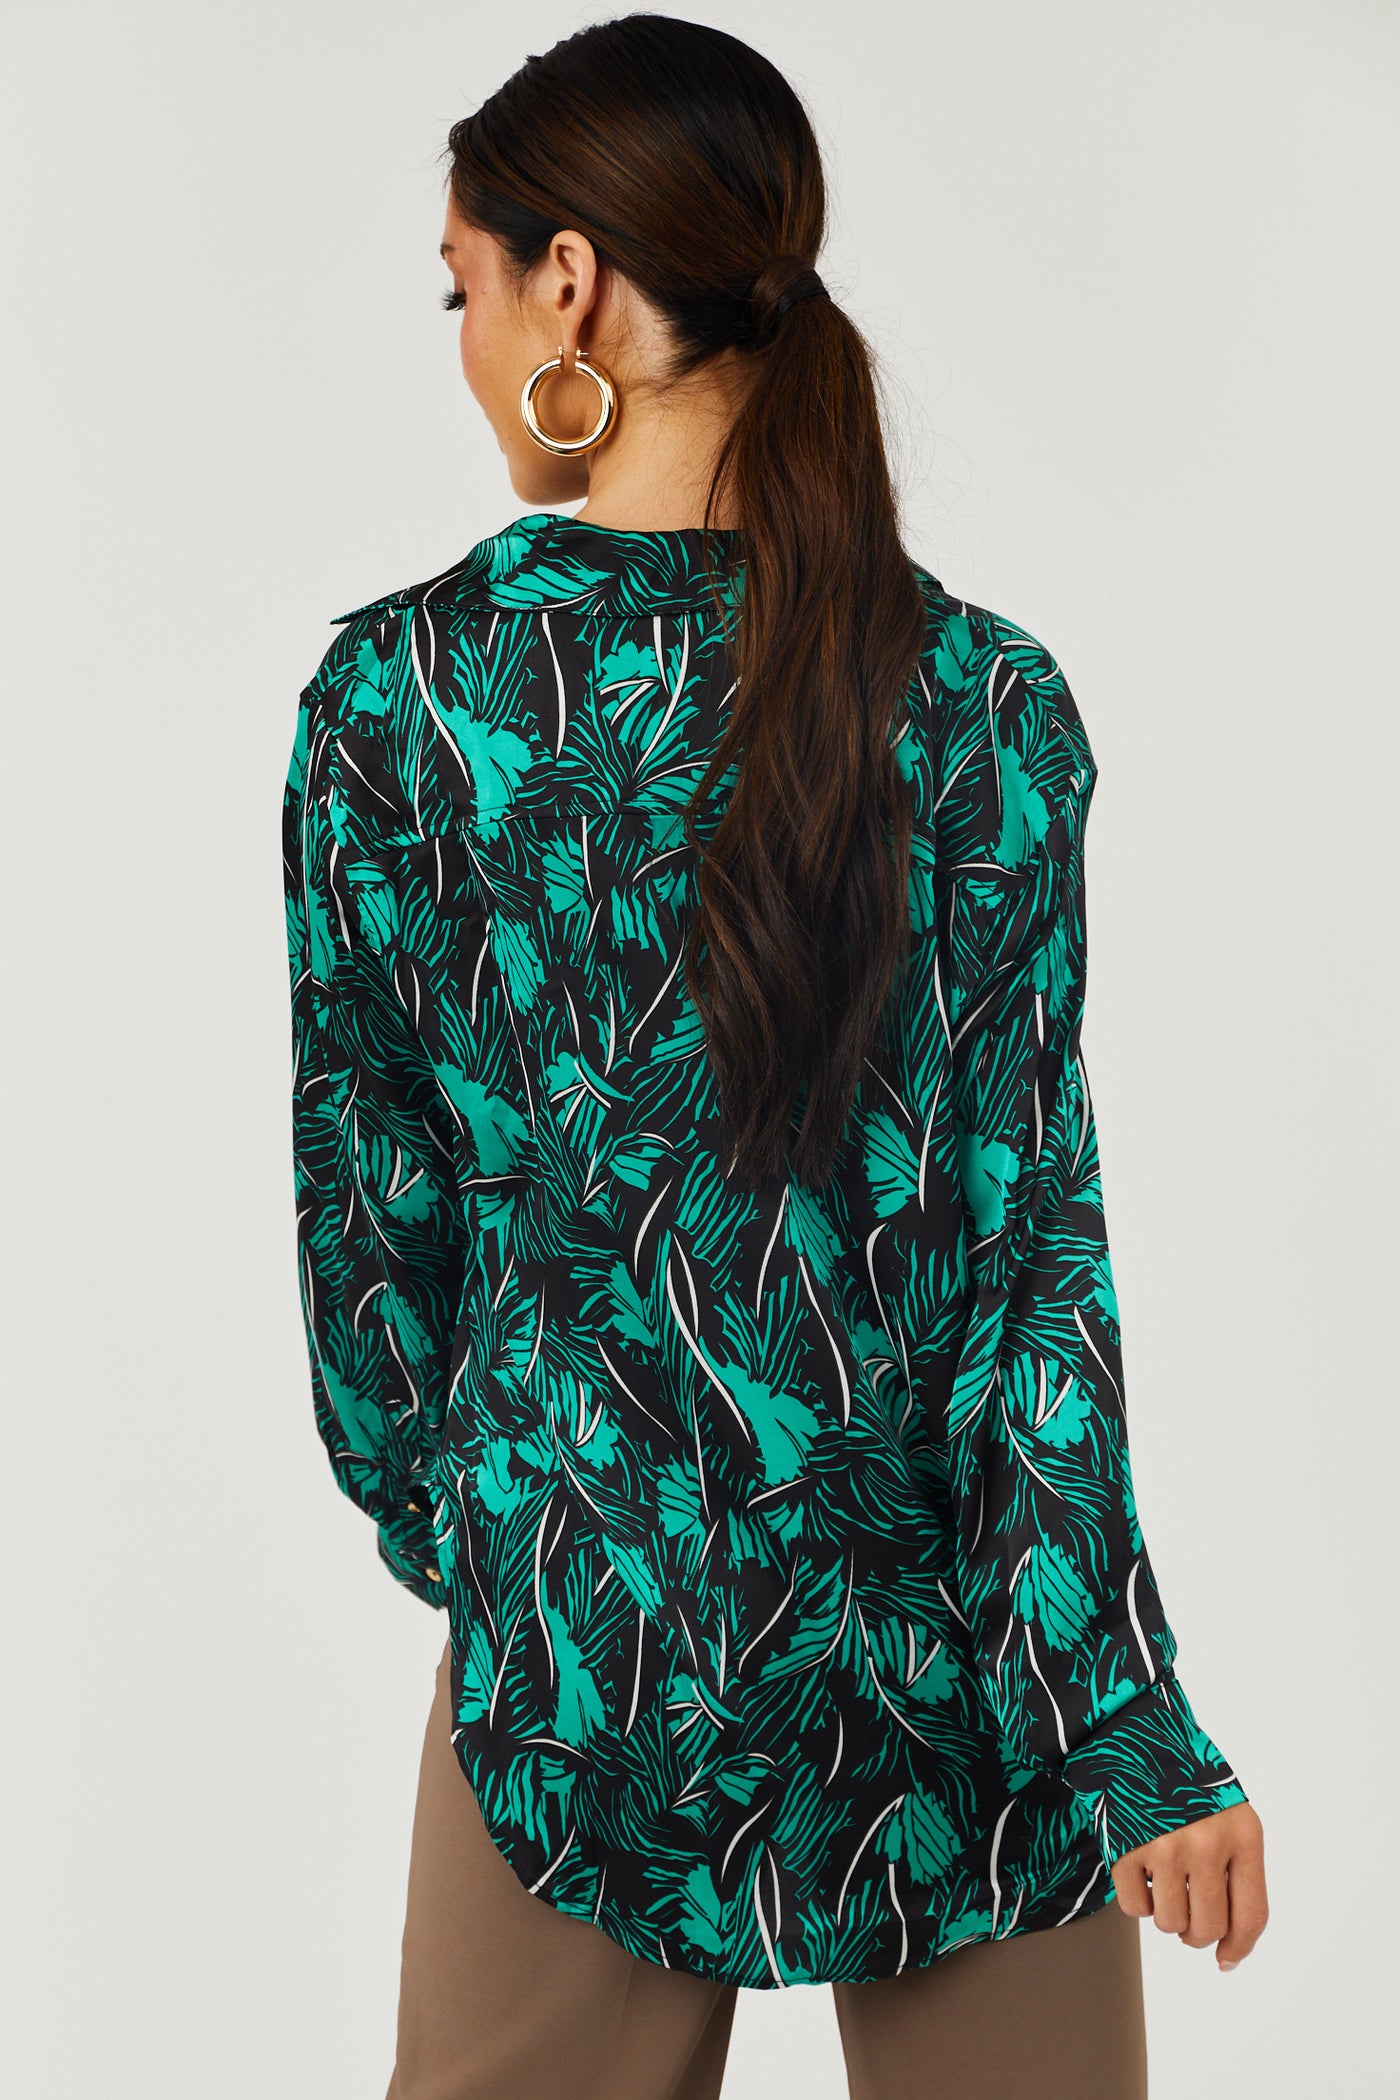 Black and Kelly Green Tropical Print Blouse